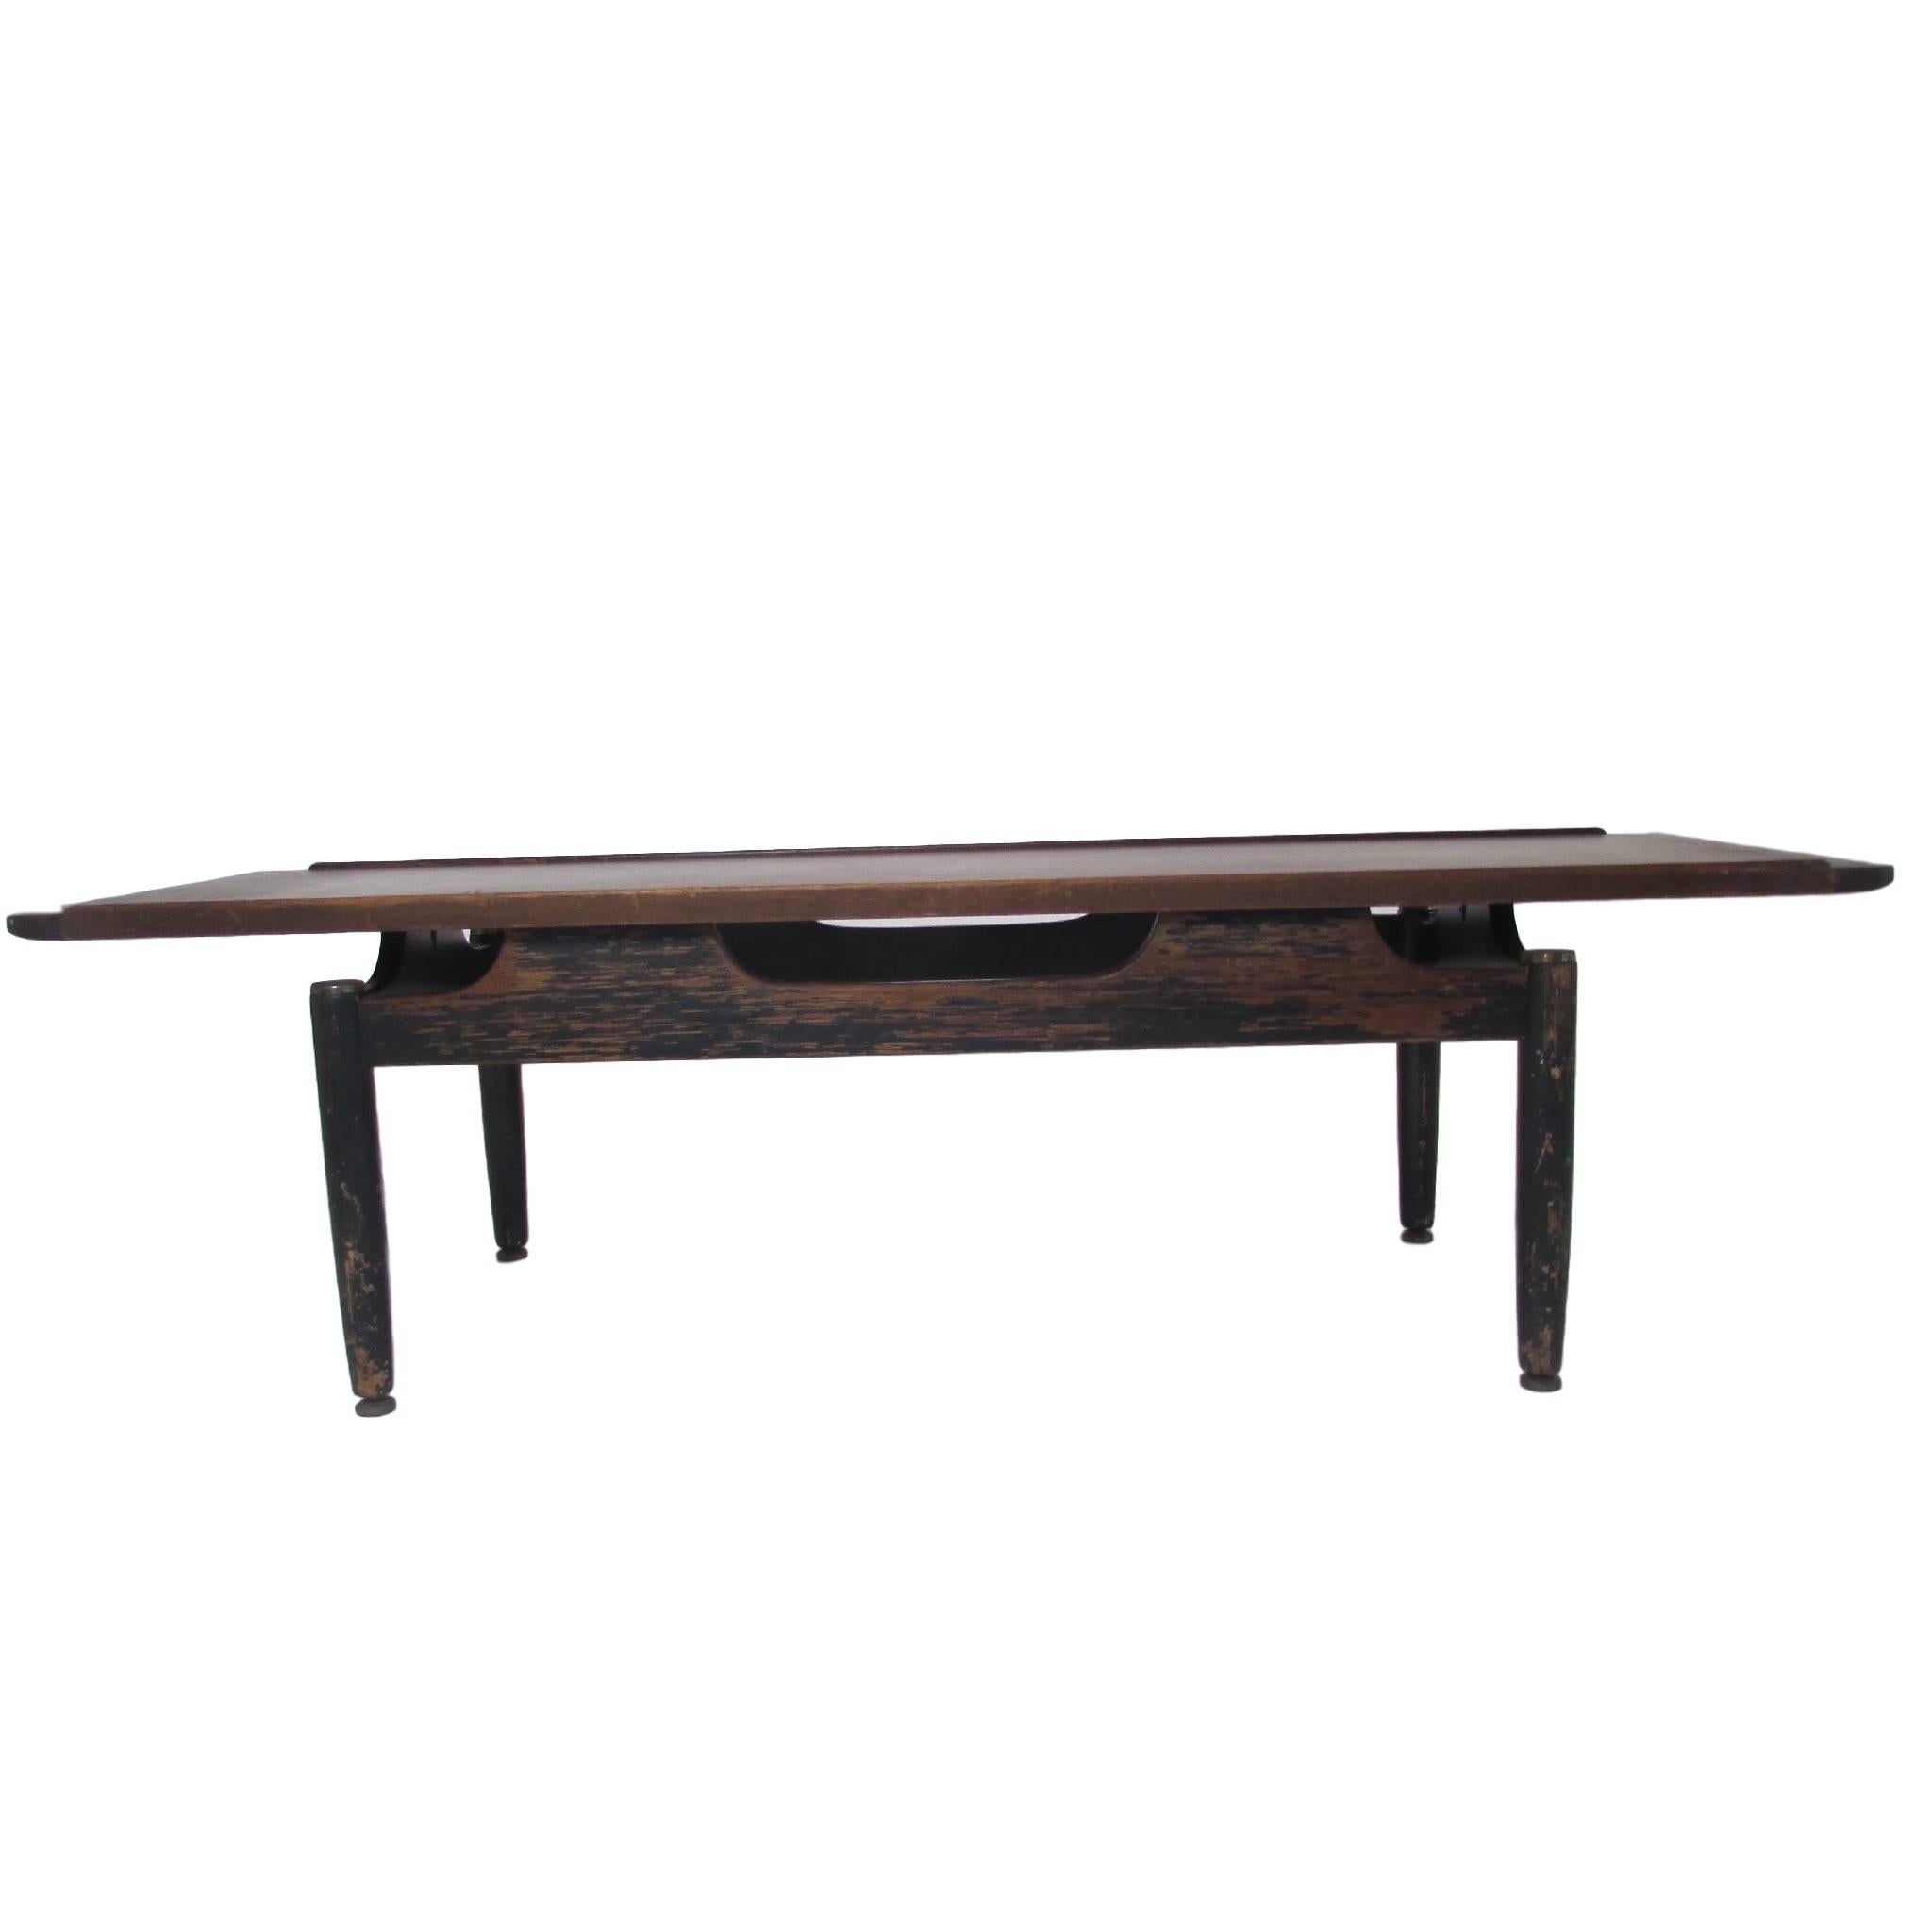 This is a mid century teak G-Plan Long John coffee table.  Having a modern sleek design, the base is painted black and has brass caps on the tops of each leg.  